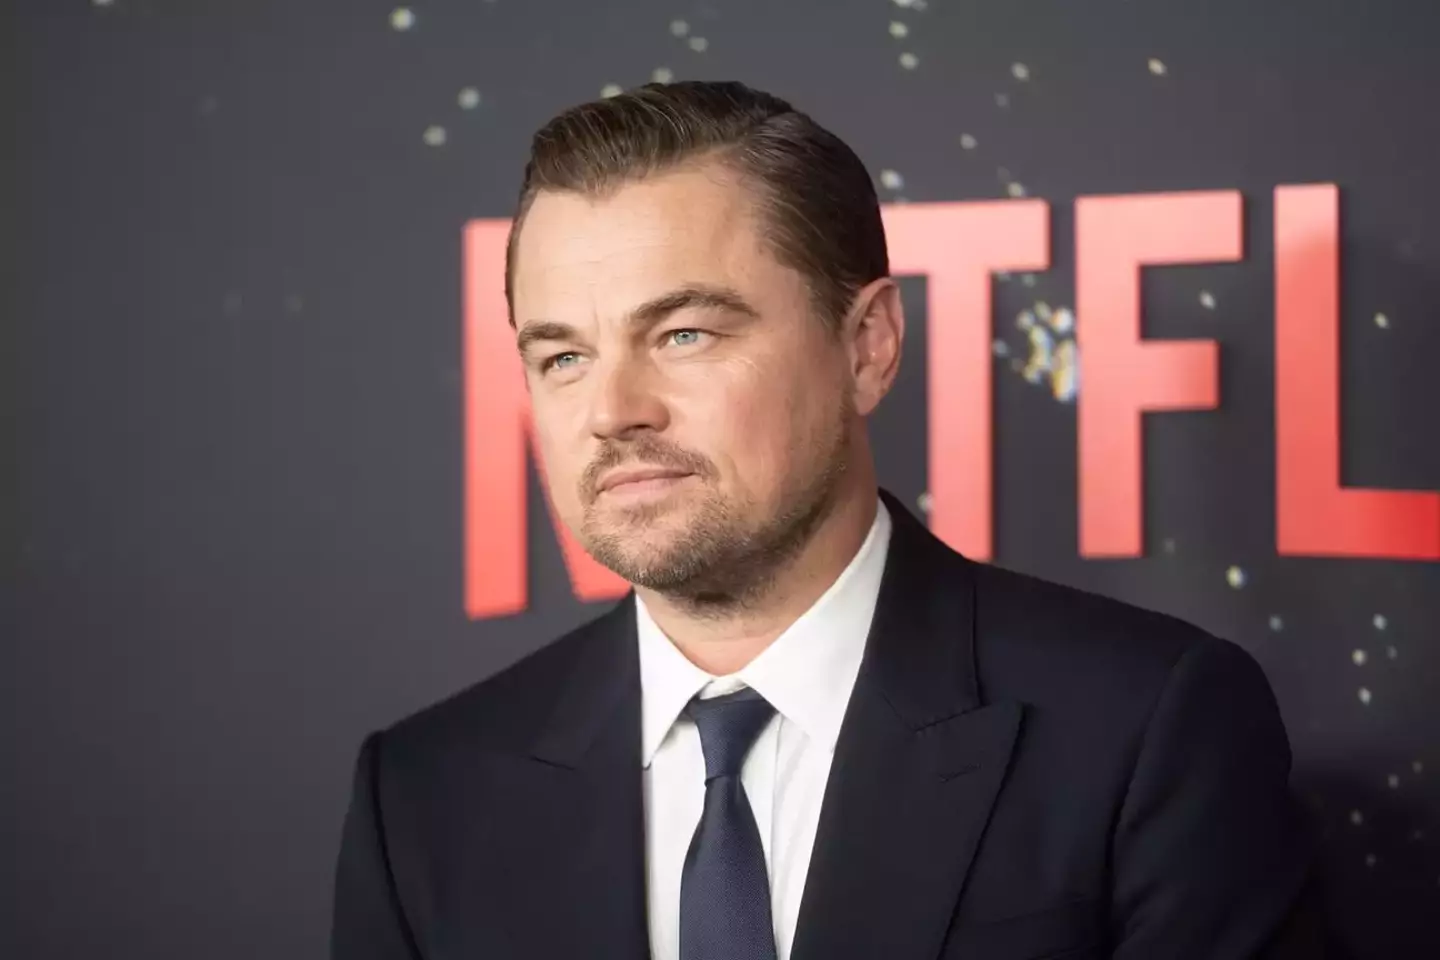 DiCaprio wants to do one more film before he turns 50.